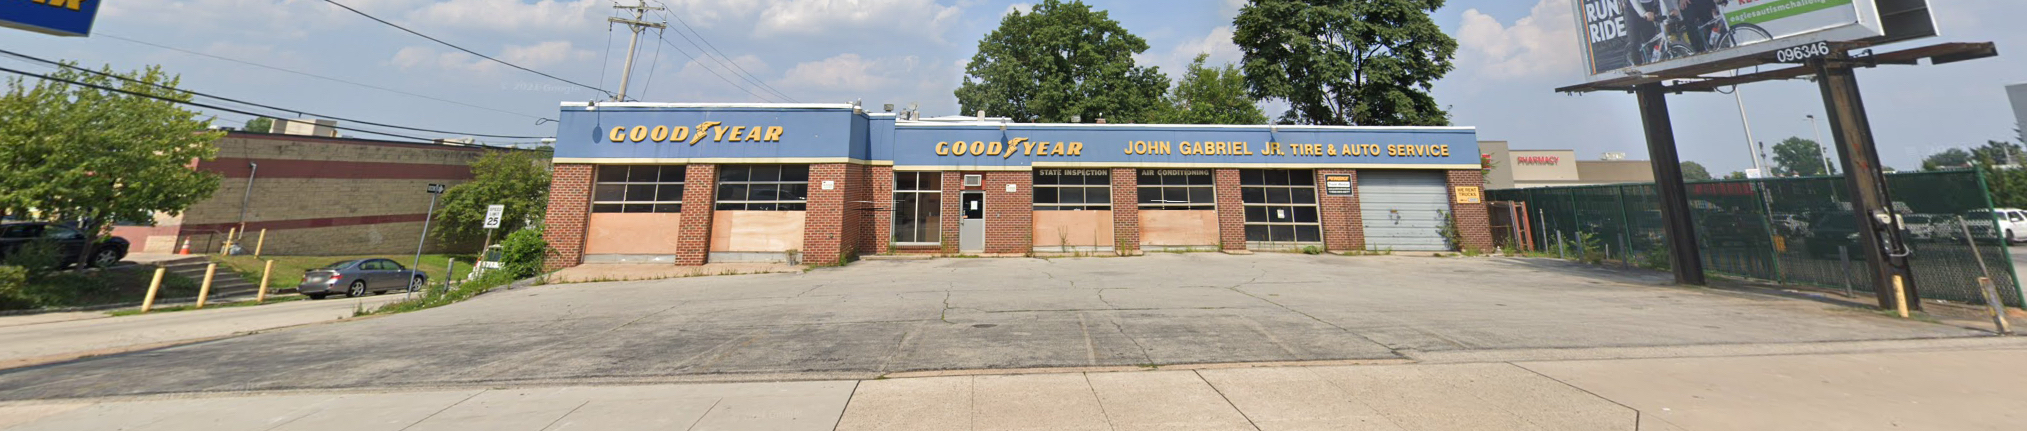 This former Goodyear Tire site was exclusively listed and sold by MPN Realty